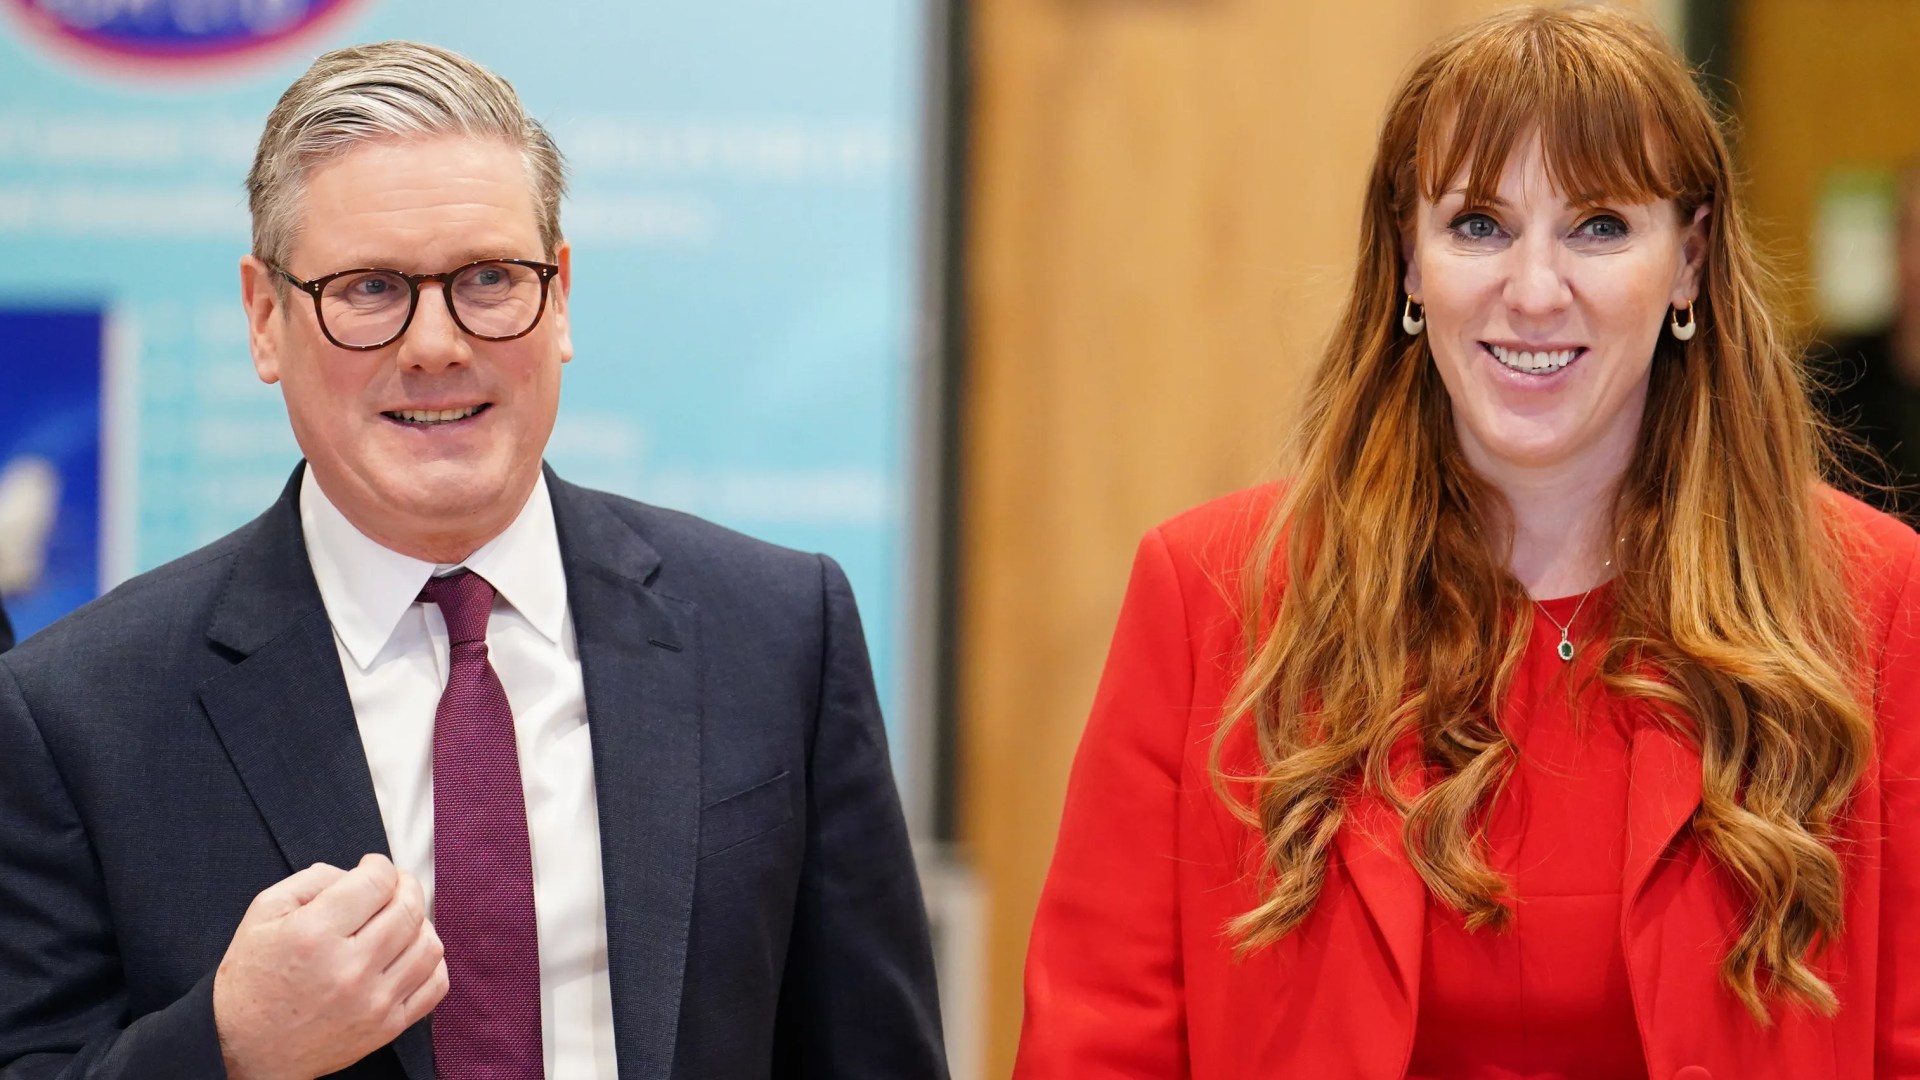 If a Tory ‘dodged capital gains tax’ Angela Rayner would be demanding evidence should be out in public domain [Video]